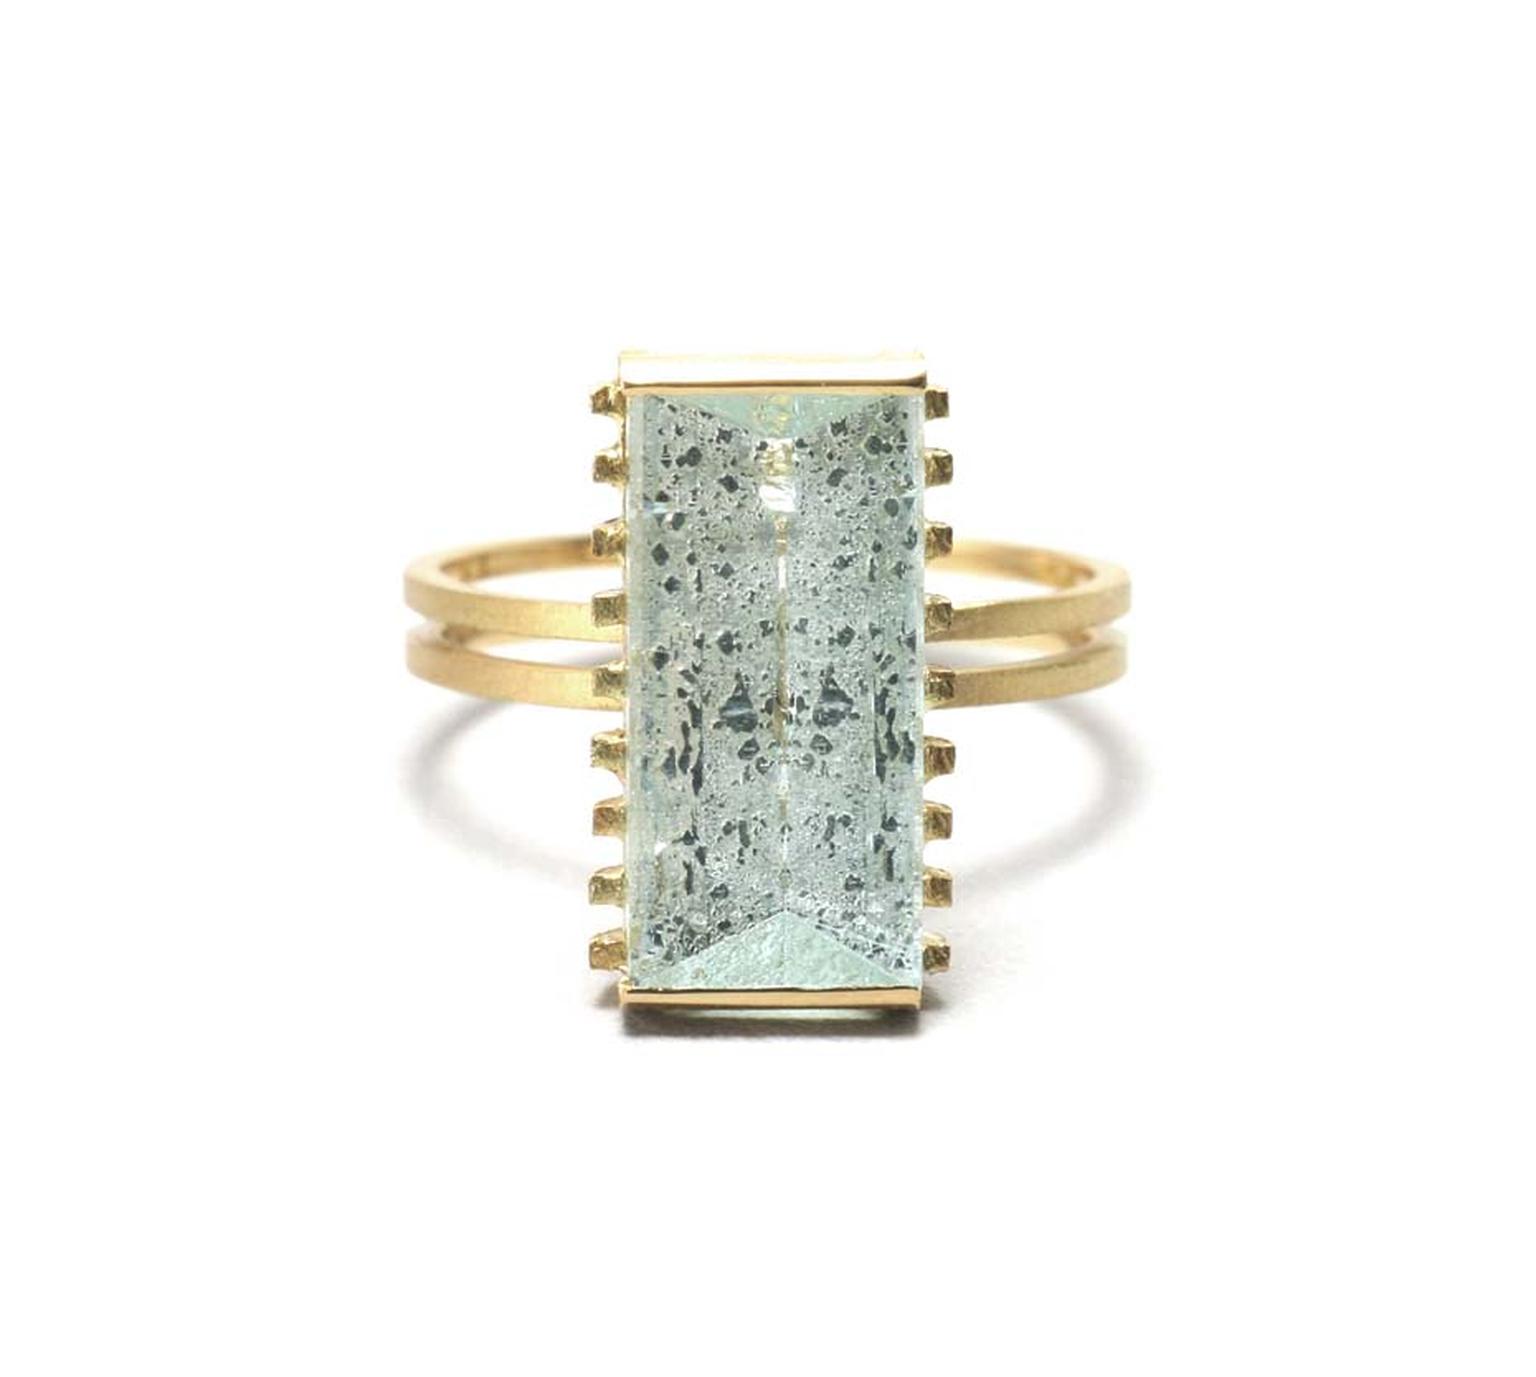 Shimell and Madden's Prism collection Rough Aqua Strut ring in textured gold with a 4.35ct mirror-cut aquamarine.